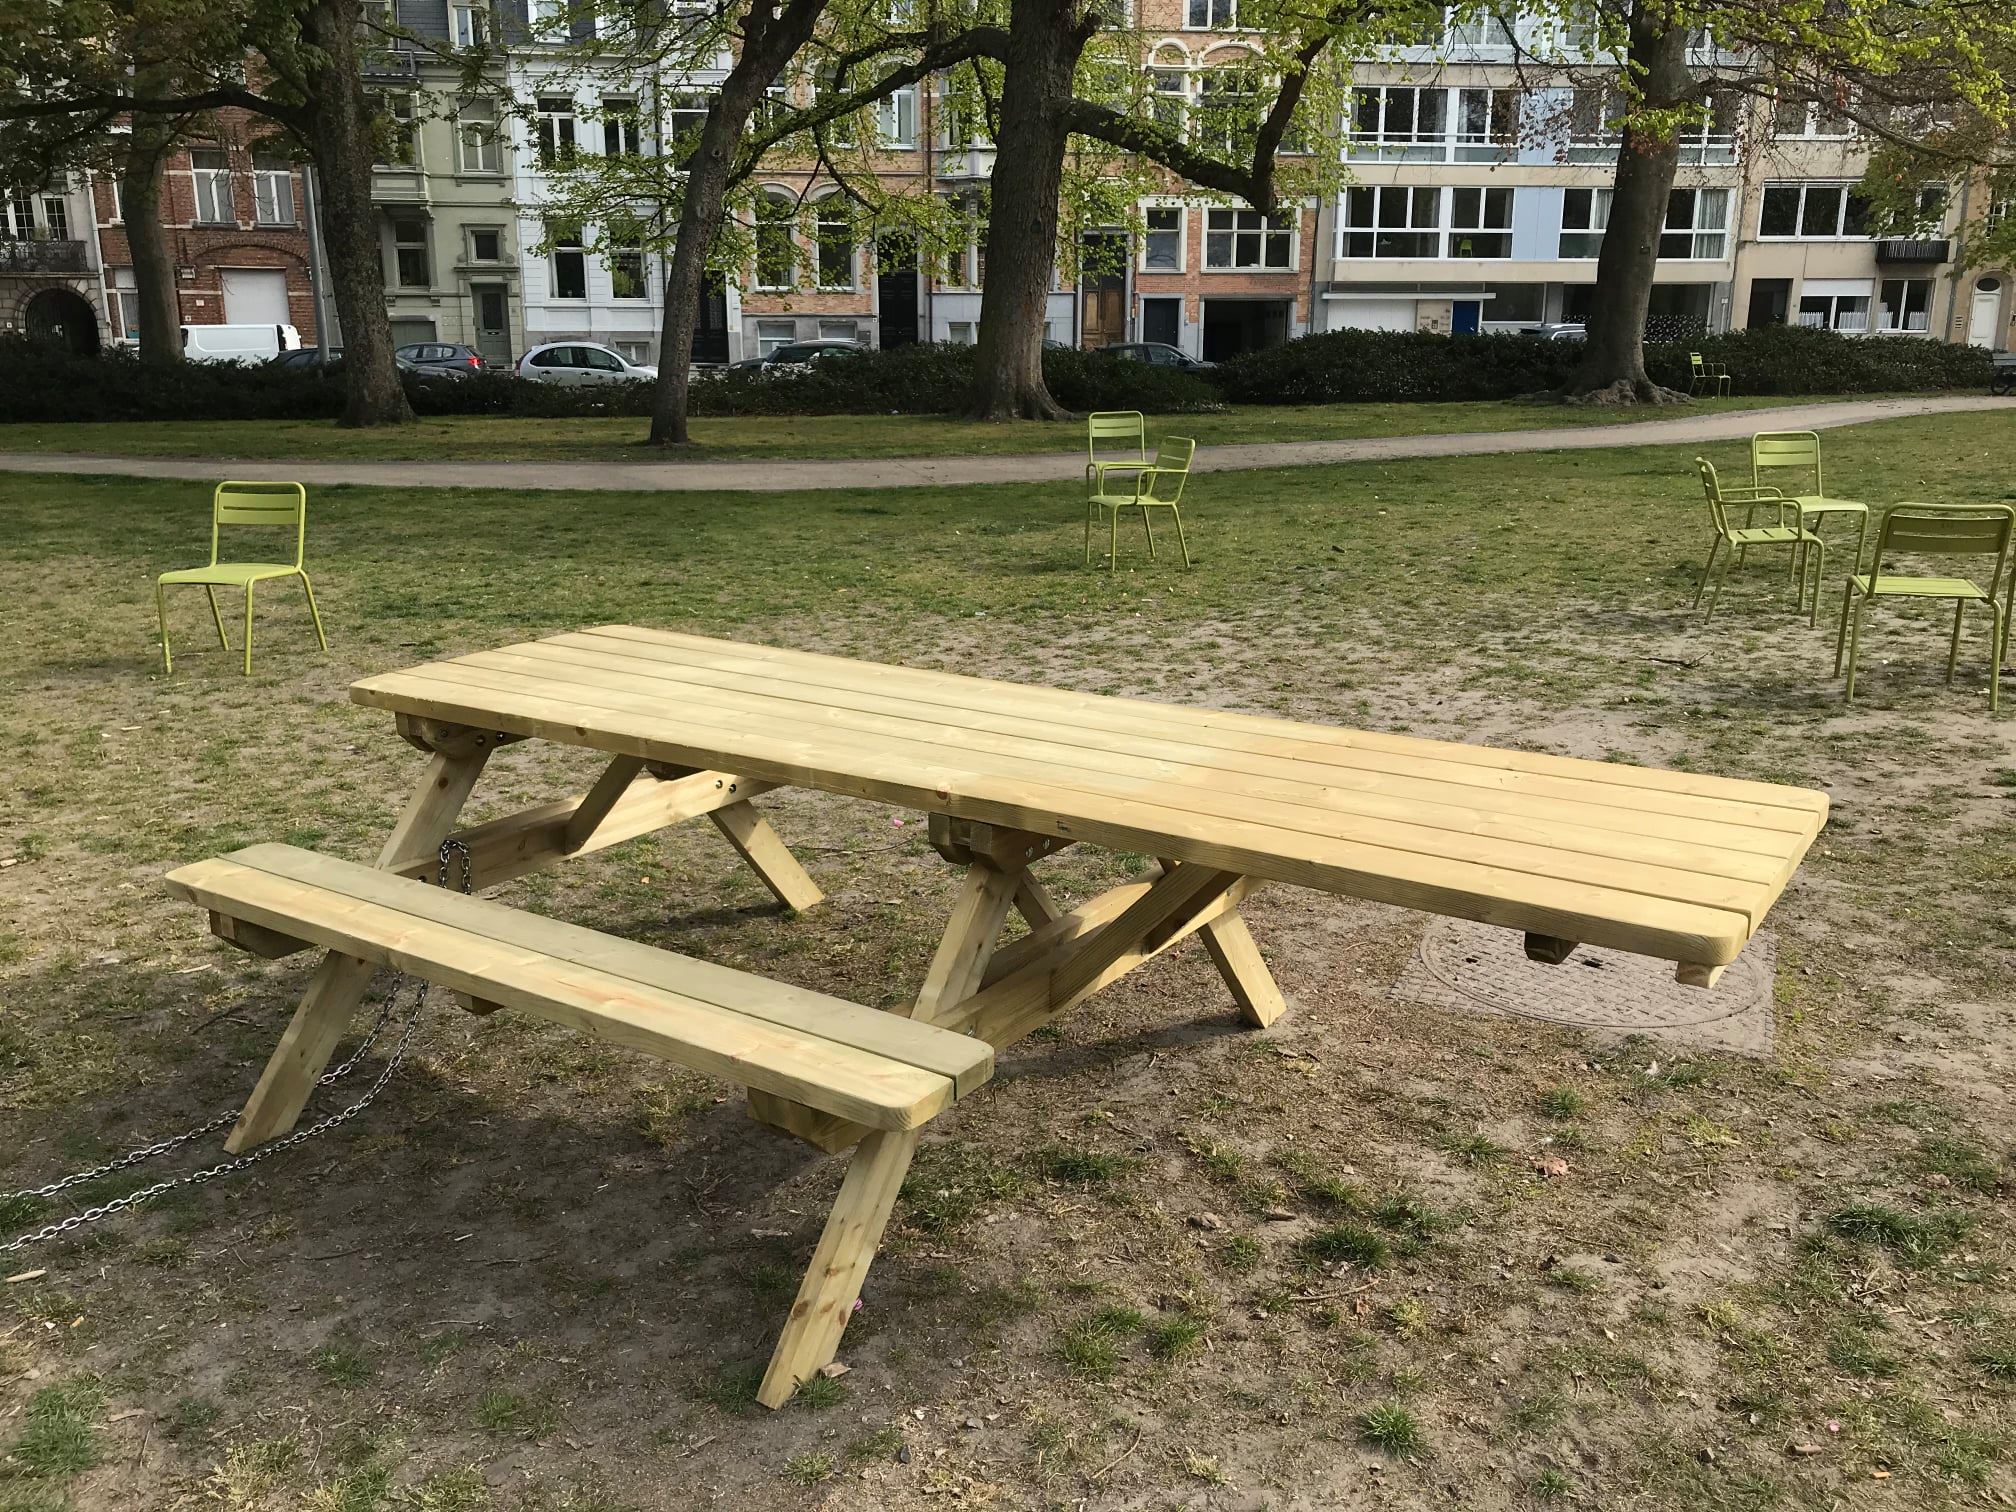 ''As soon as we see the sun we want to go outside. I want to design the public domain so that it is also accessible to all its users. That is why we are installing 40 wheelchair-friendly picnic tables,